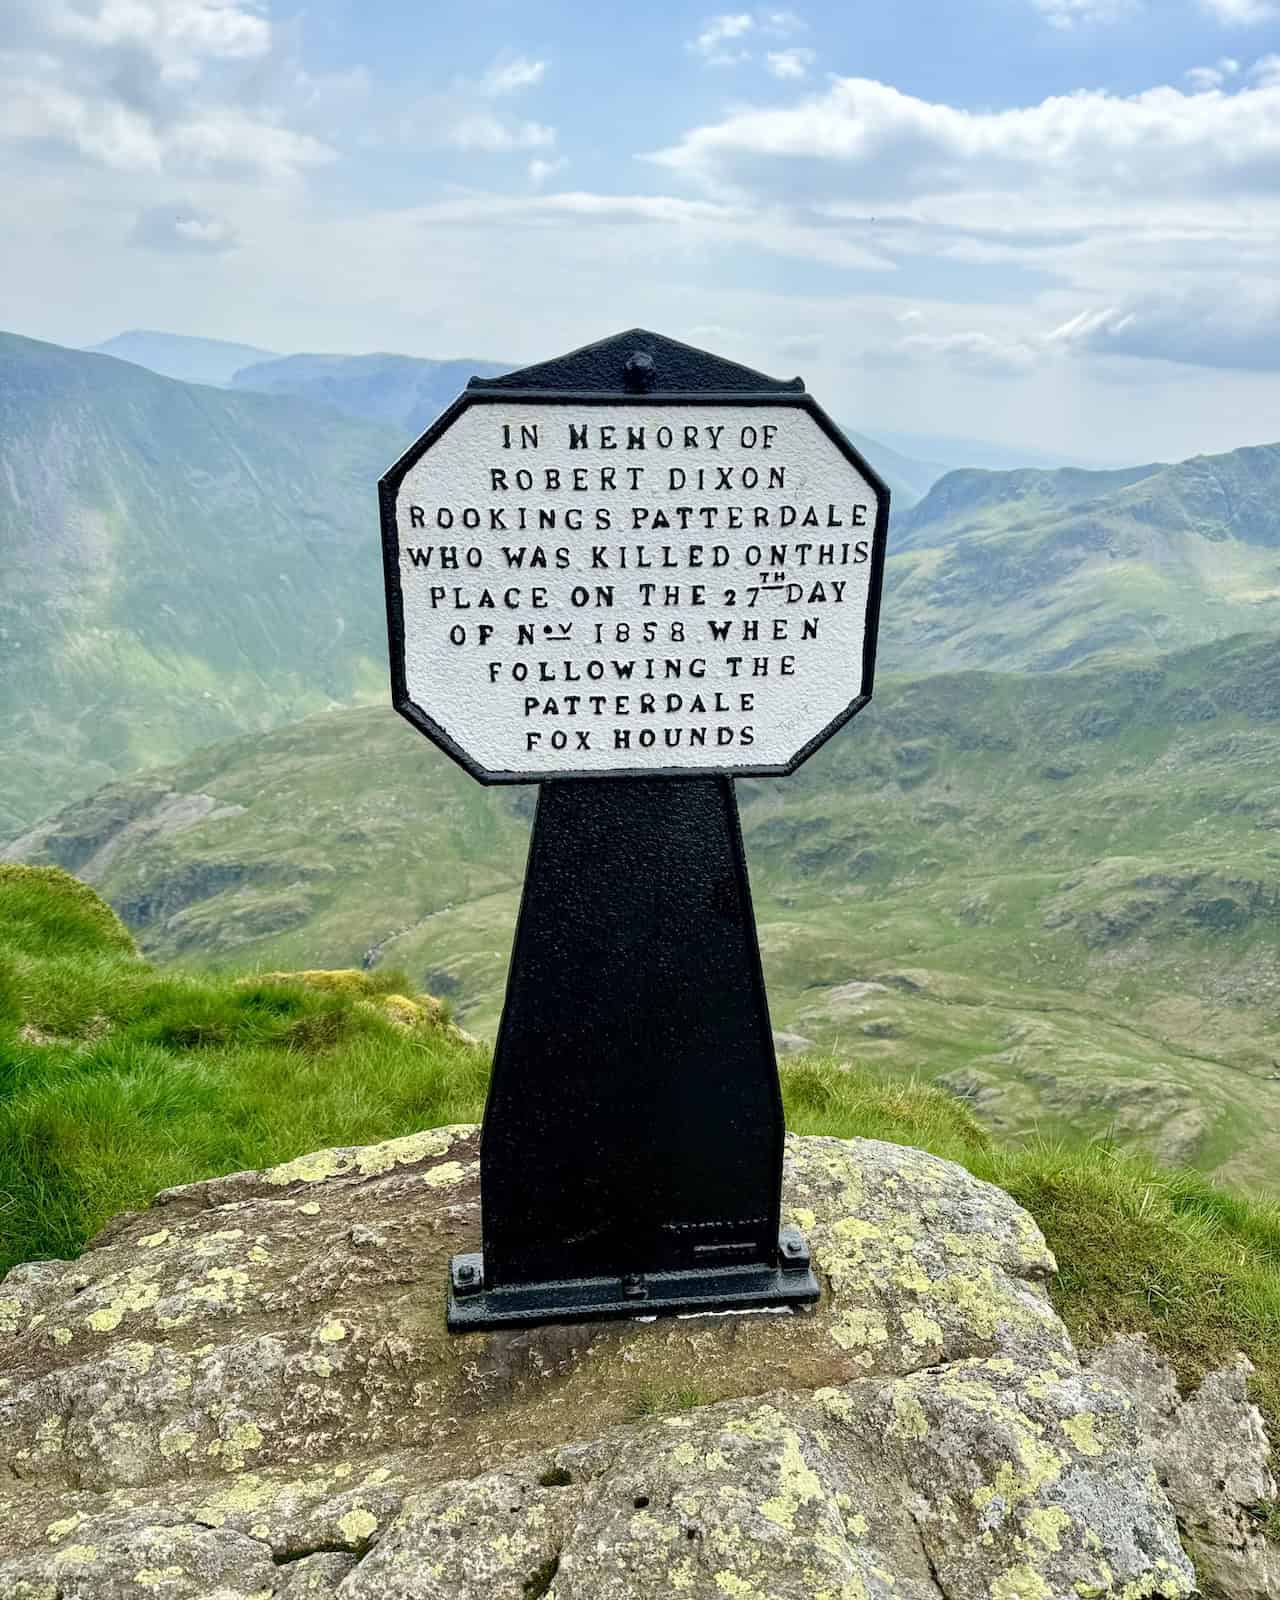 The cross commemorates Robert Dixon of Rookings, Patterdale, adding a poignant touch to our journey.